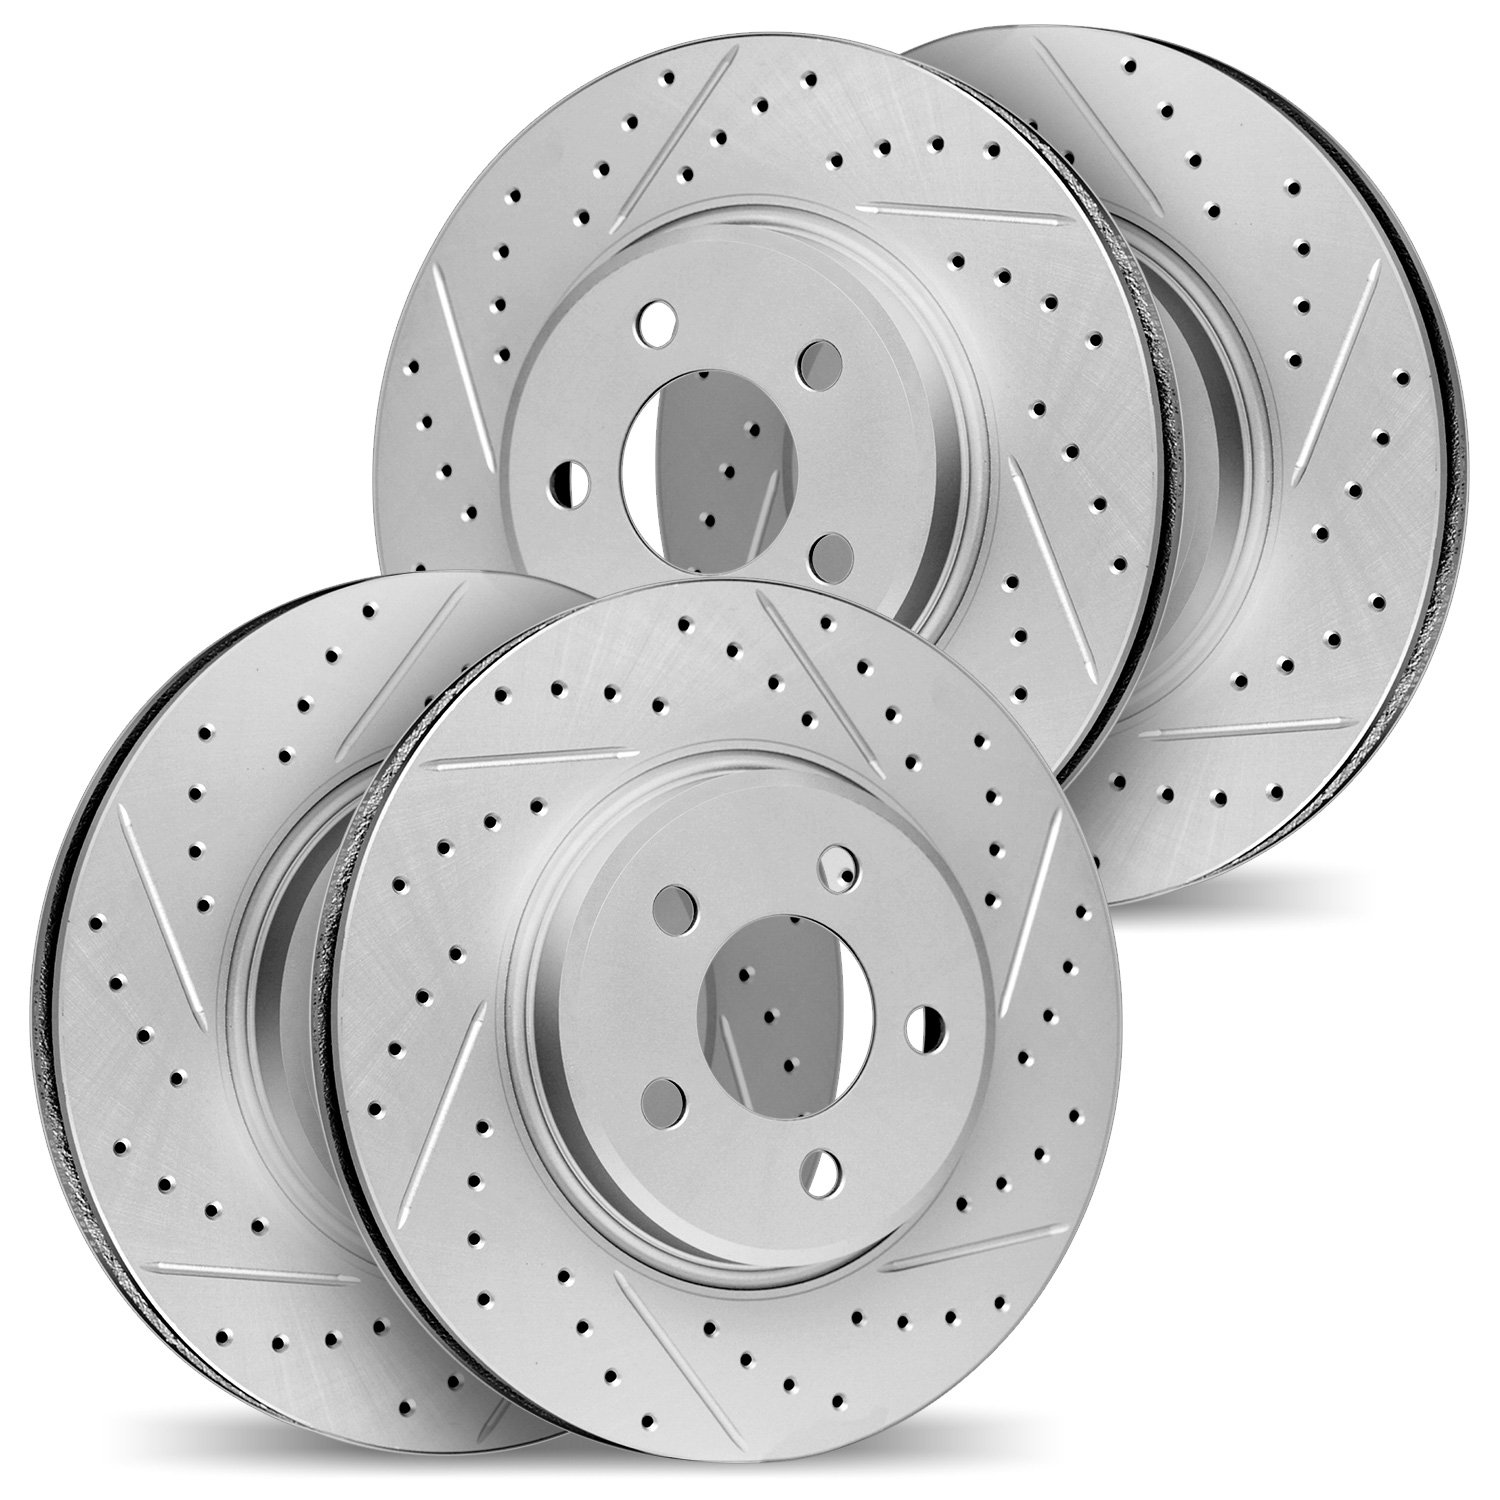 2004-75003 Geoperformance Drilled/Slotted Brake Rotors, 2013-2020 Lexus/Toyota/Scion, Position: Front and Rear